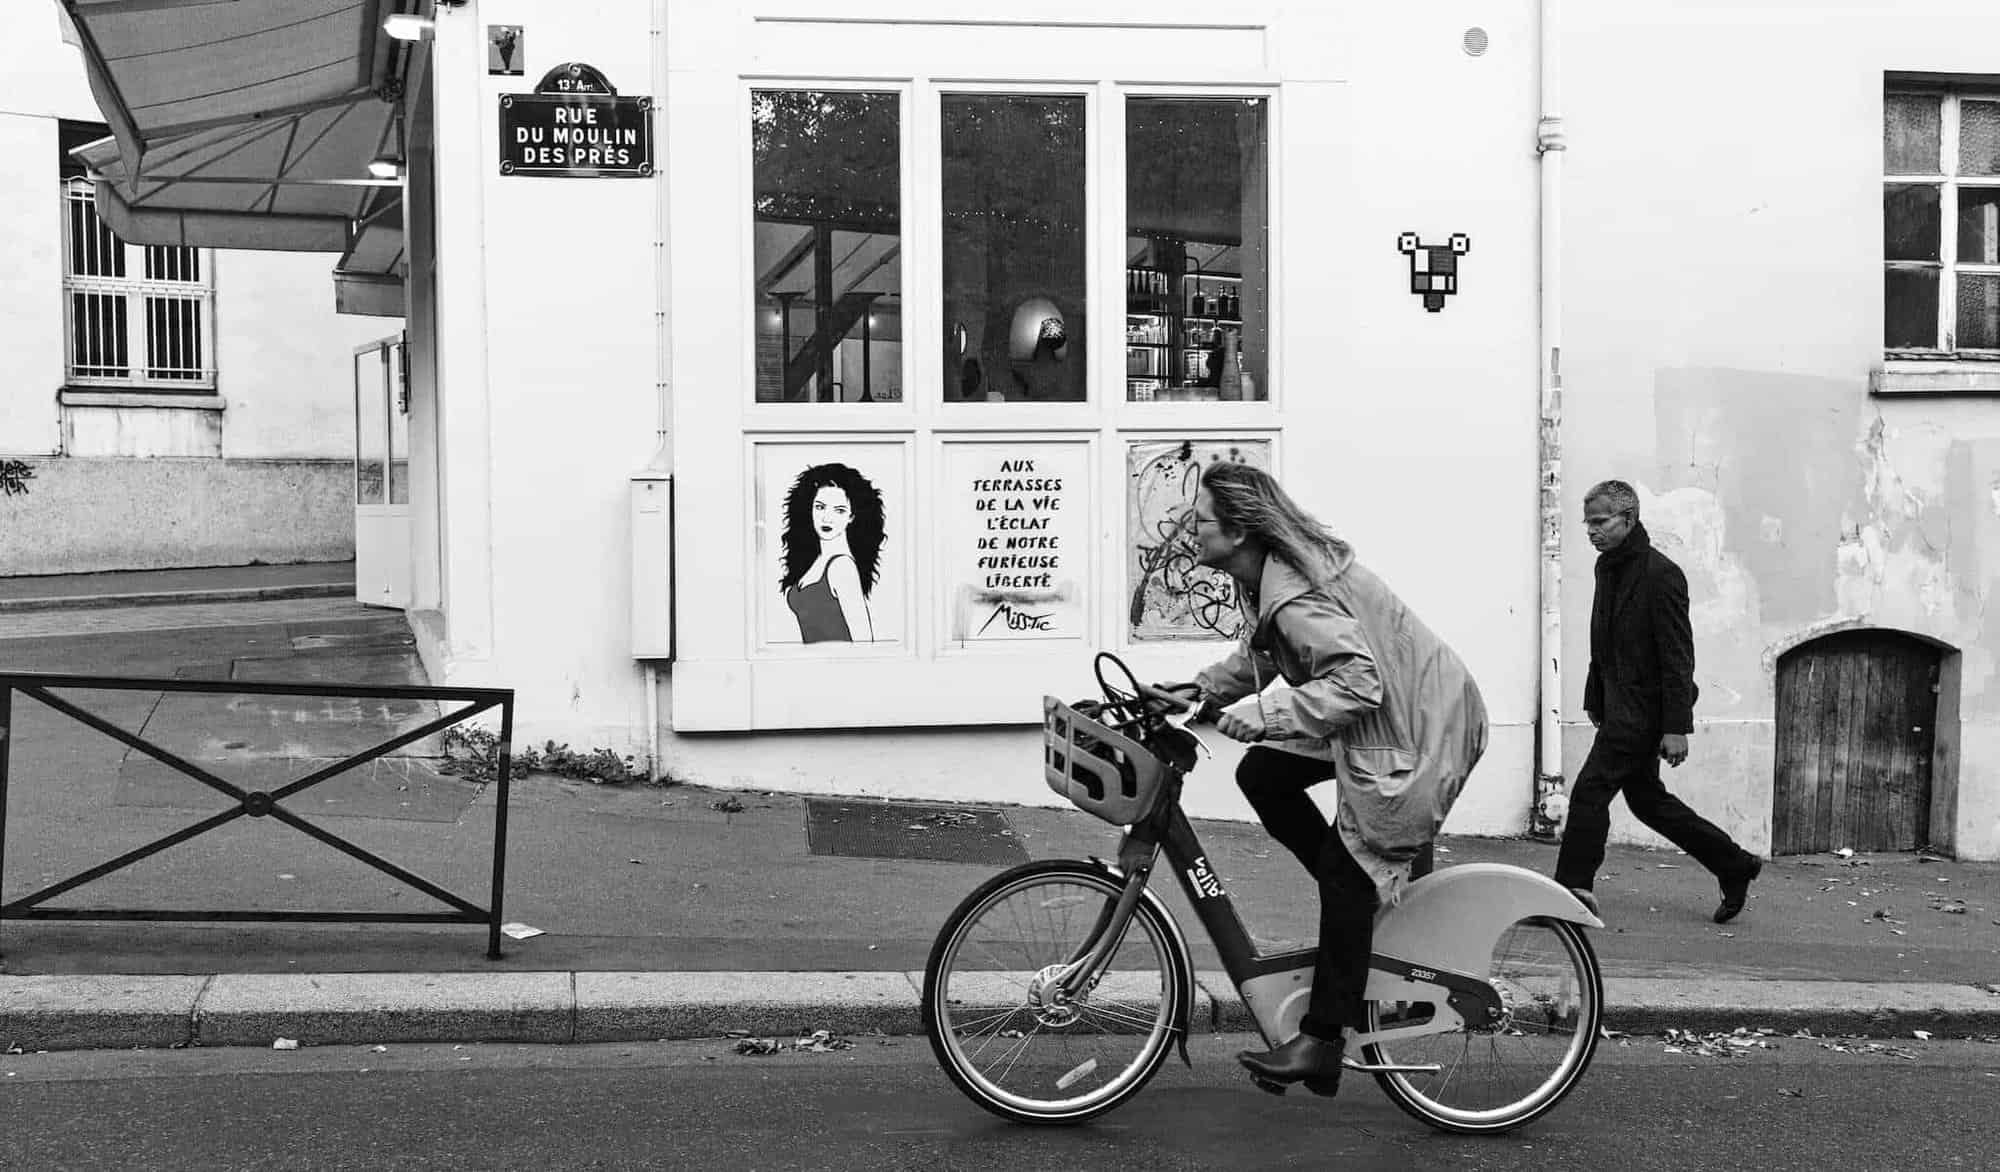 A woman in a trench coat rides a bike in Paris.